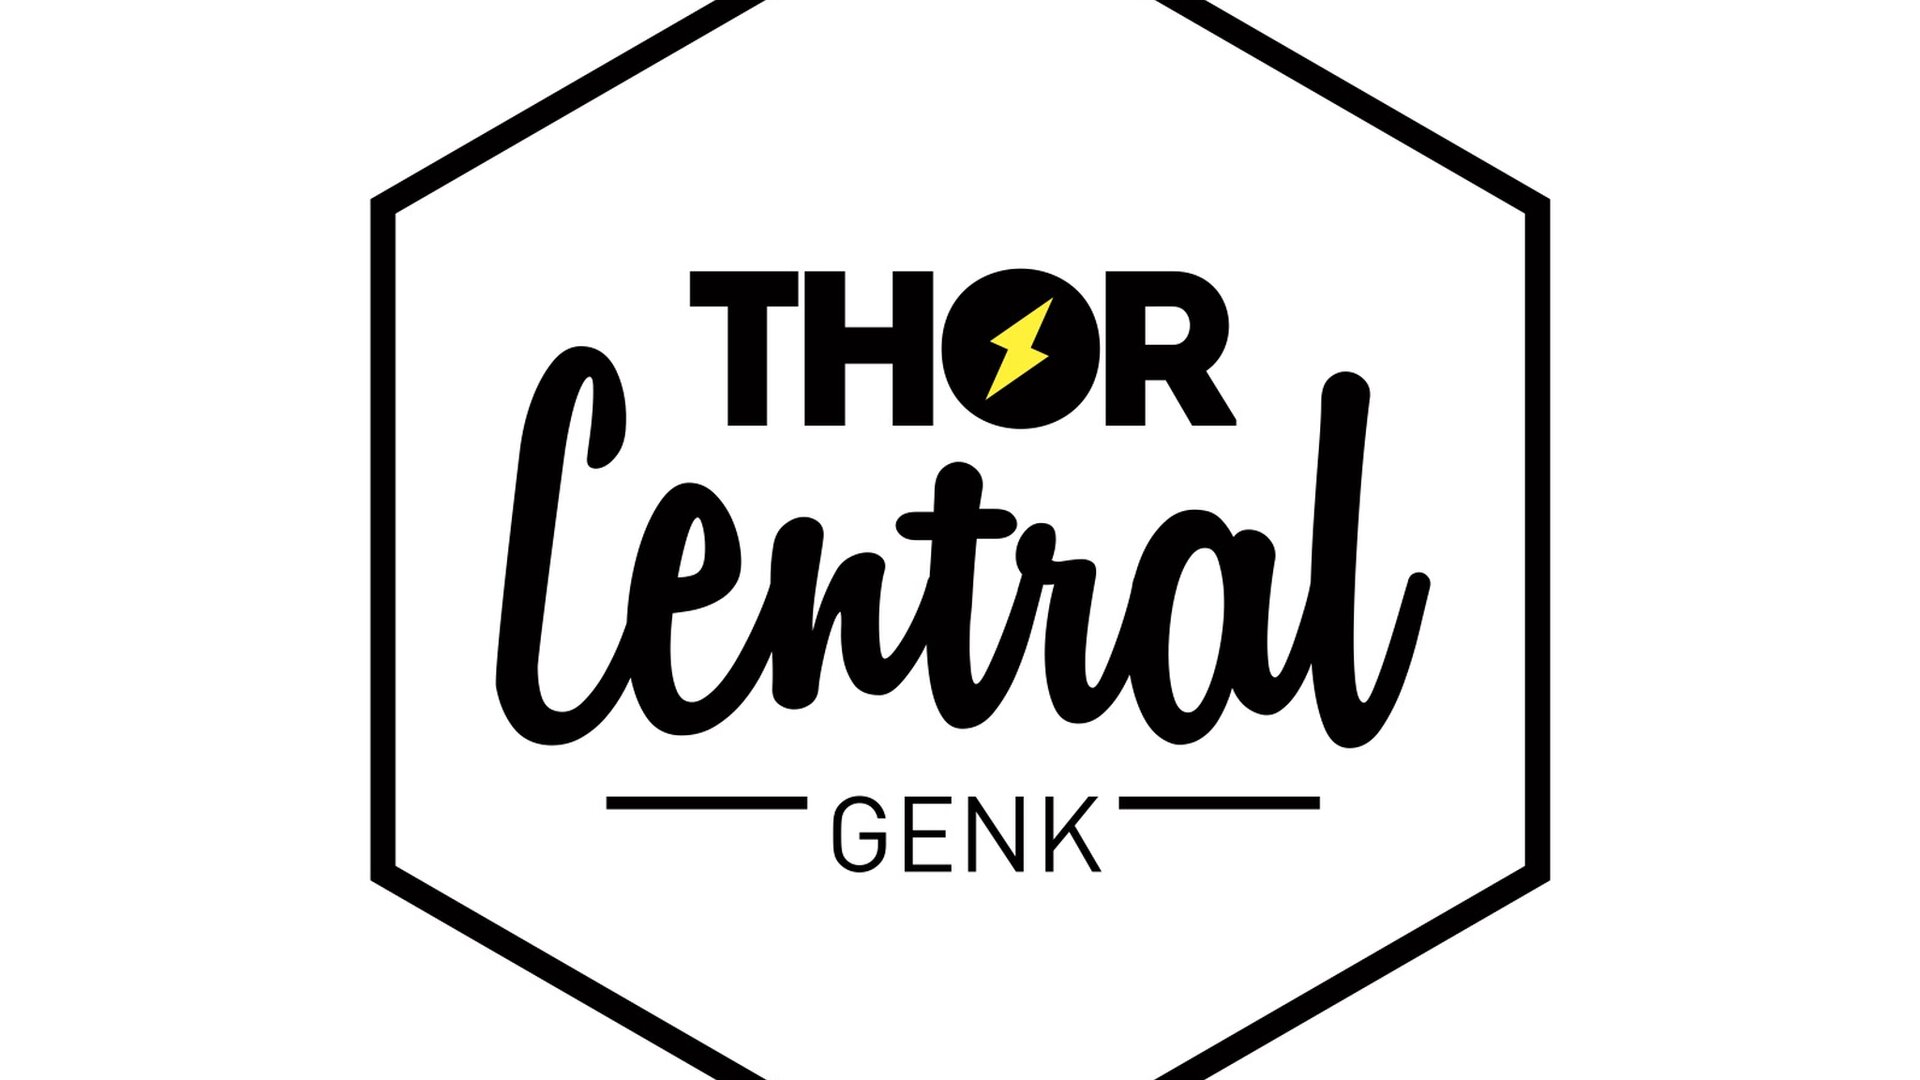 Thor central - Thor Central